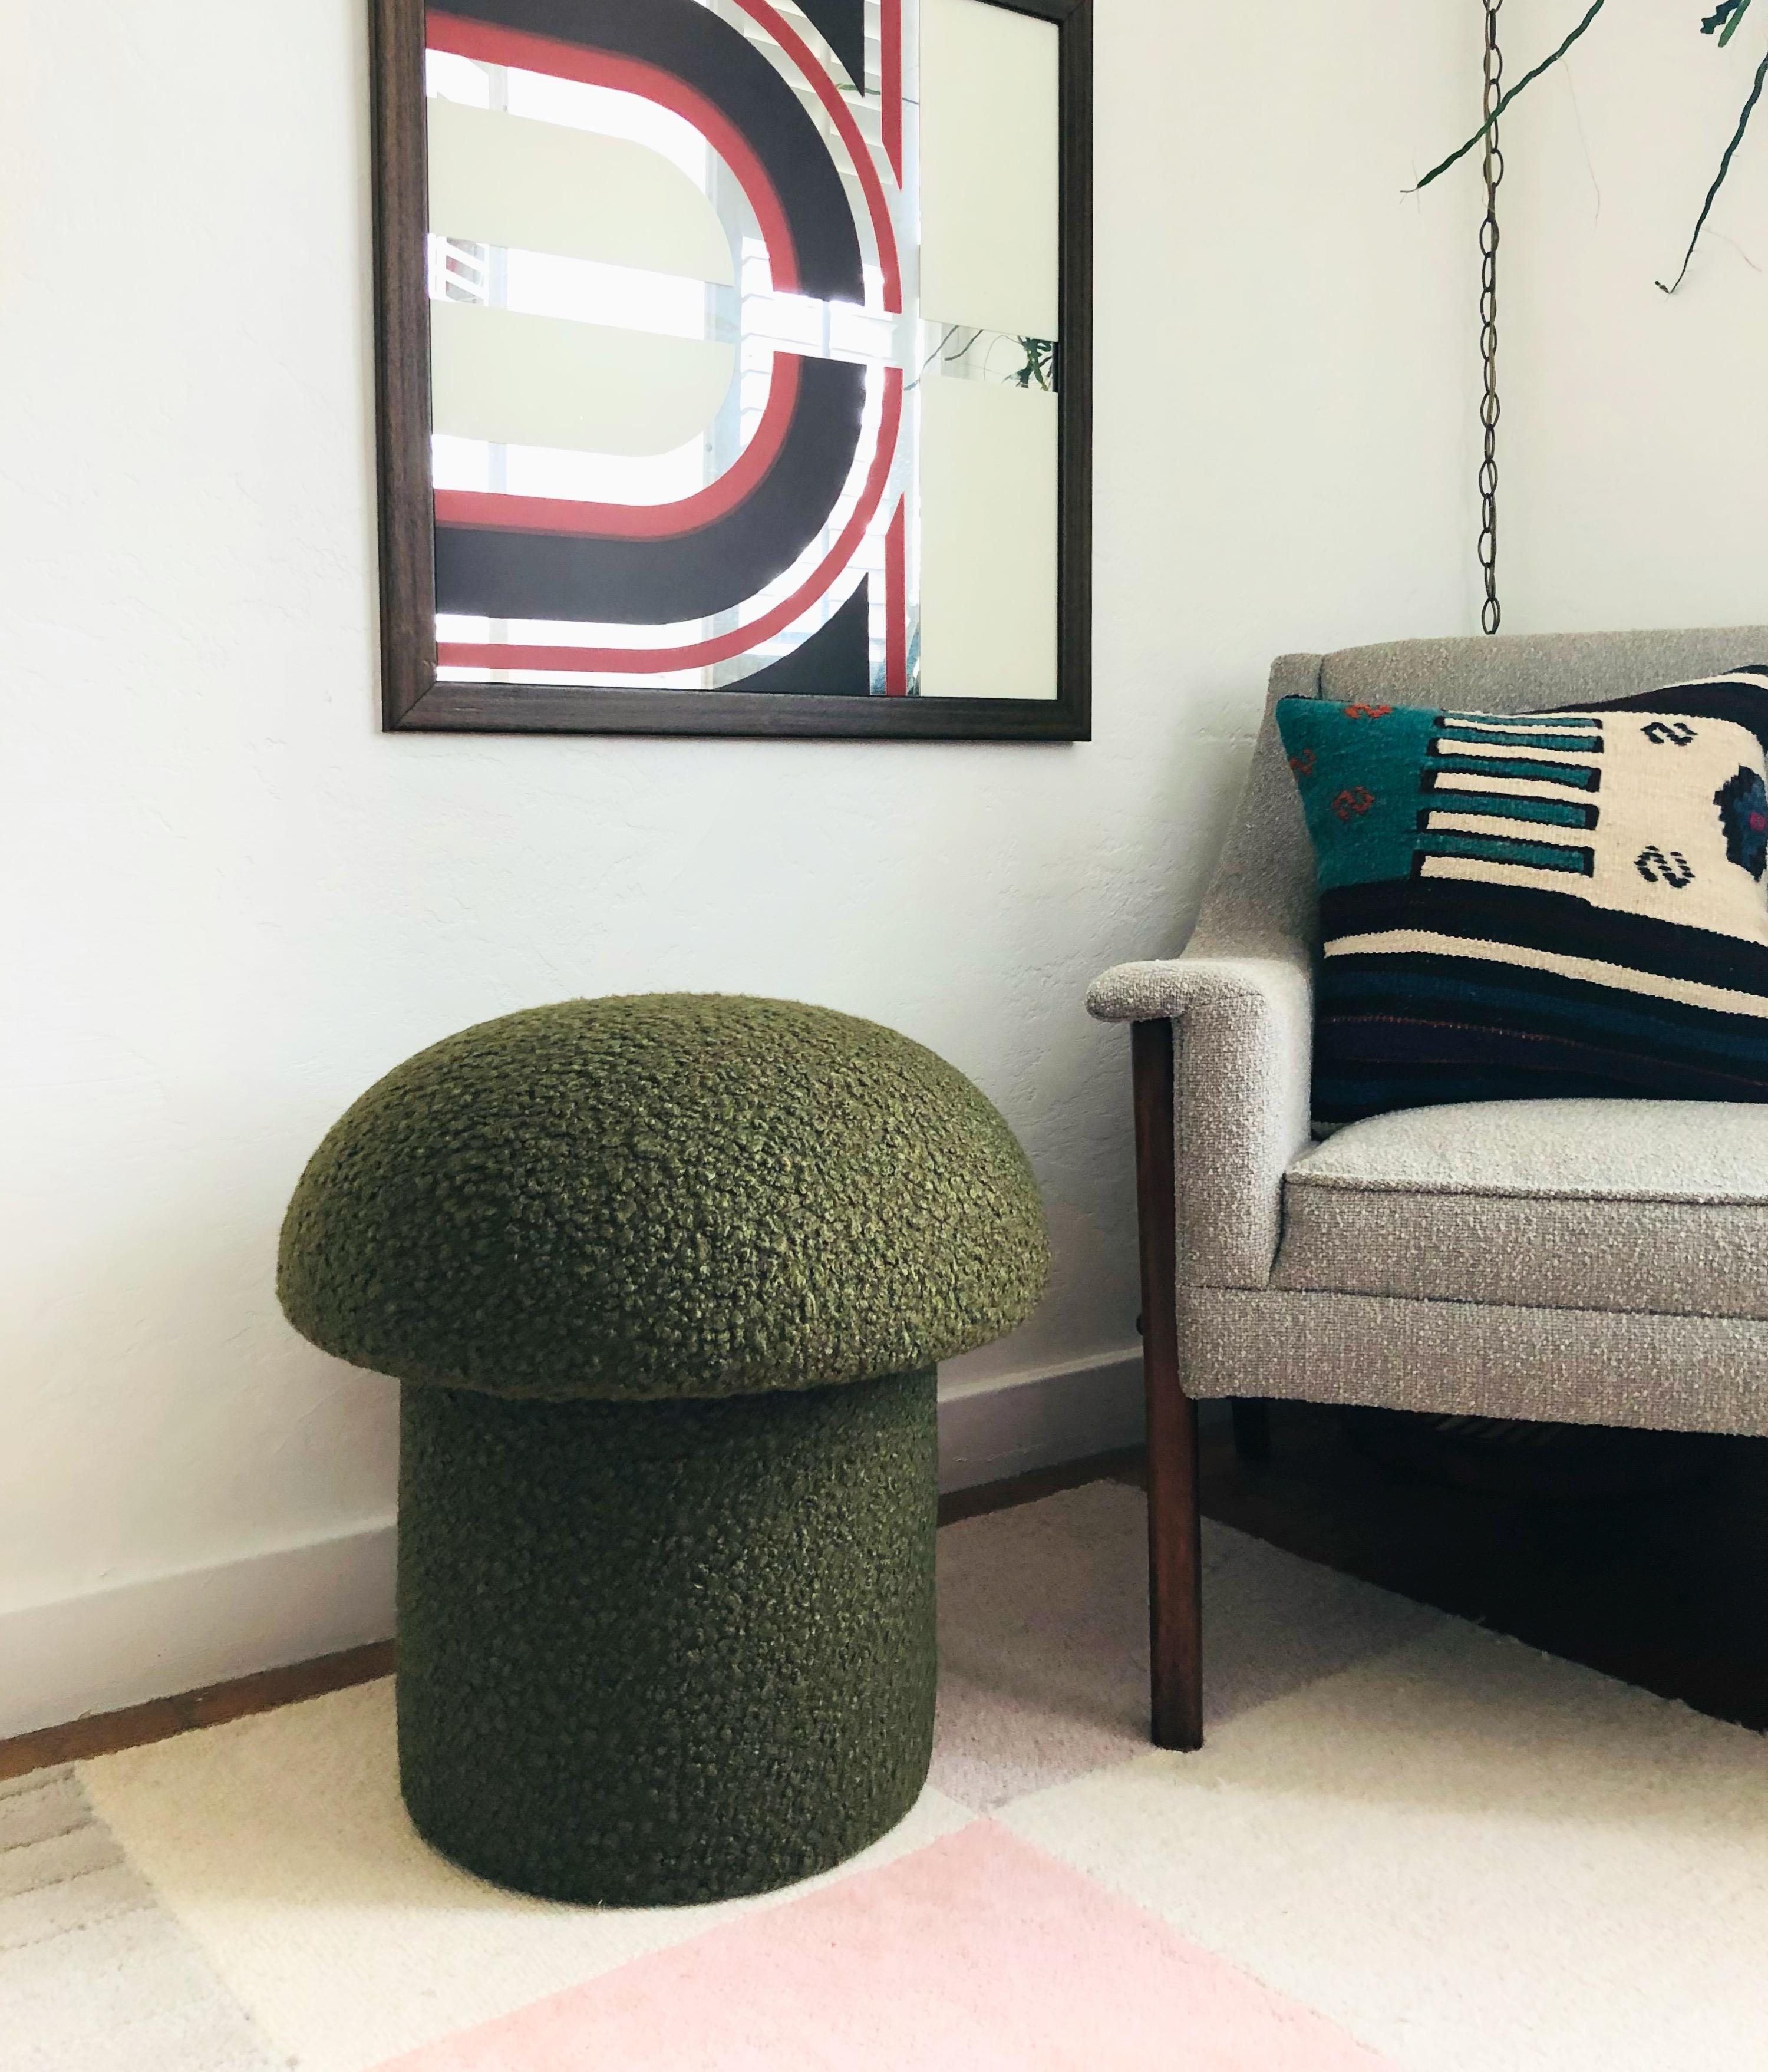 A handmade mushroom shaped ottoman, upholstered in an olive green colored curly boucle fabric. Perfect for using as a footstool or extra occasional seating. A great sculptural accent piece.
Mushroom ottomans are made to order, customizations are not